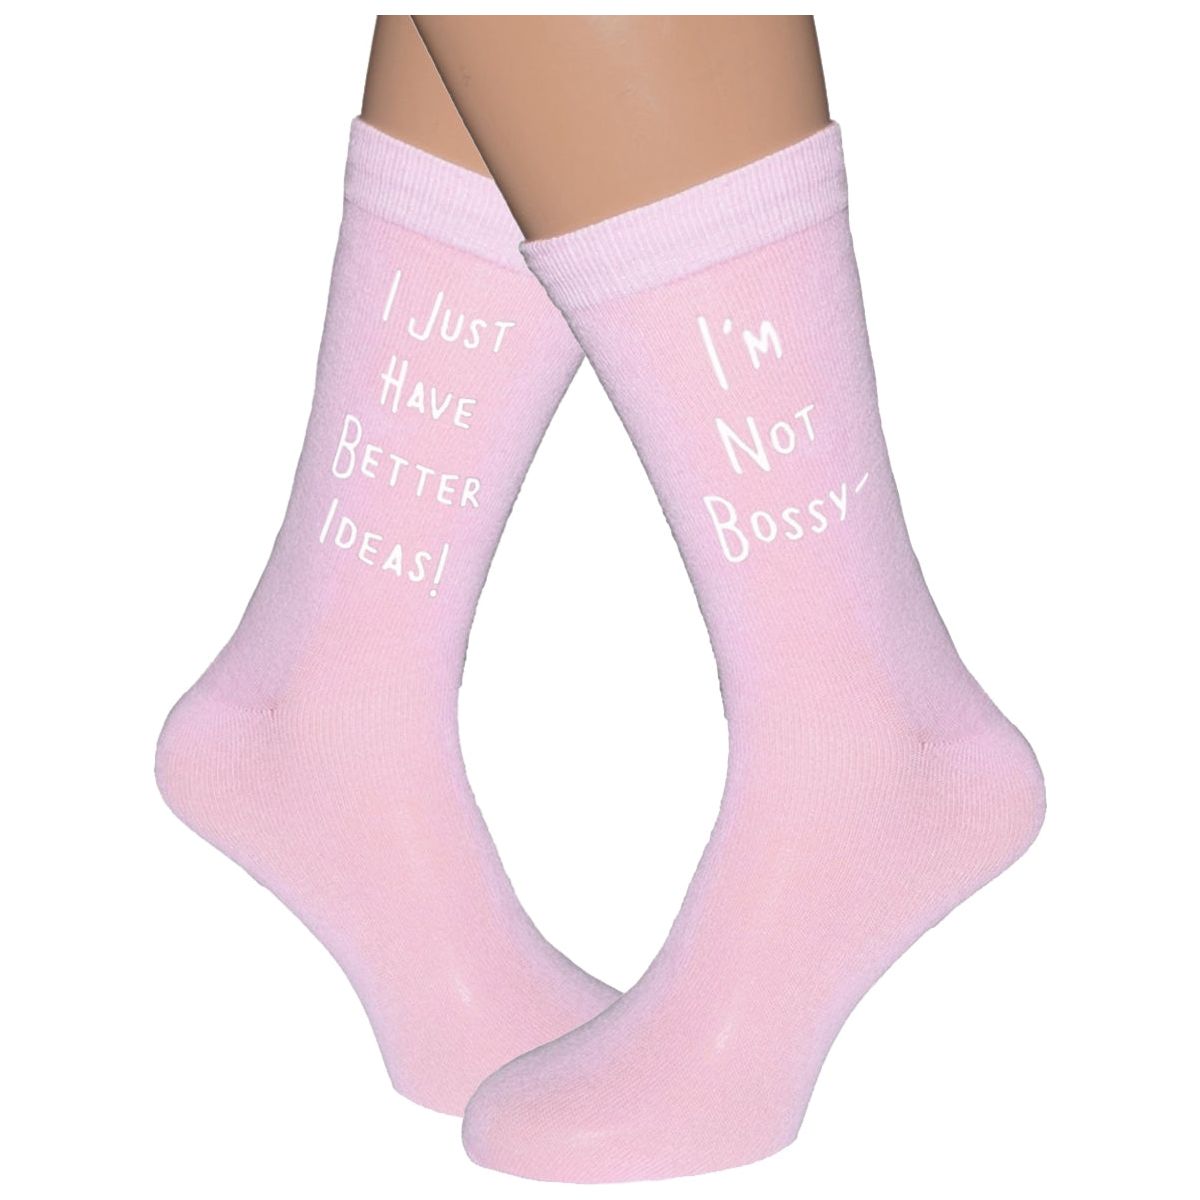 I'm Not Bossy I Just Have Better Ideas Socks - Ashton and Finch